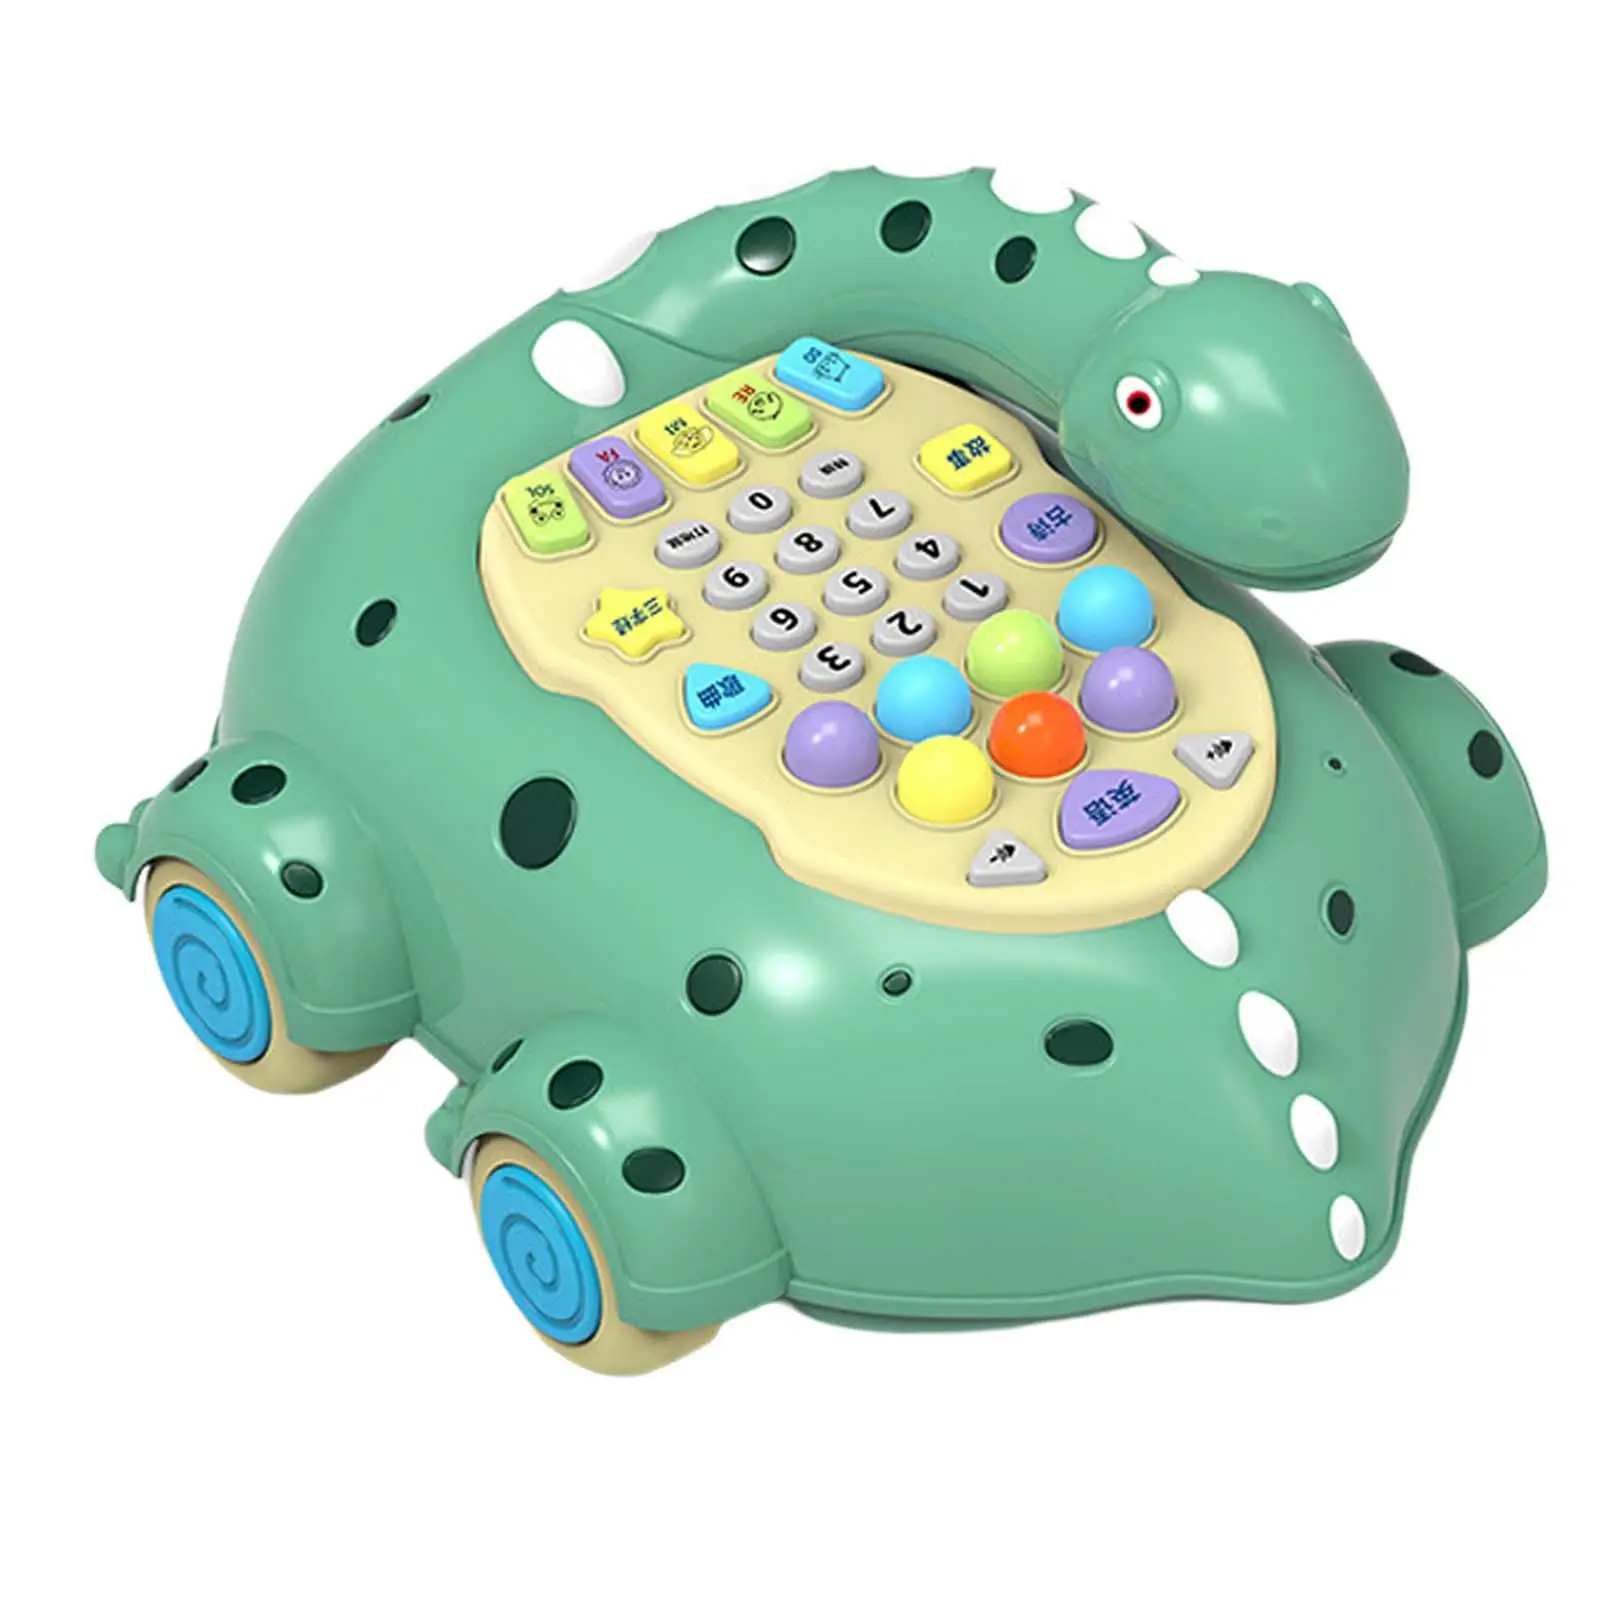 Baby Telephone Toy Pretend Play Multifunctional music Light Phone Toy for Game Interaction Preschool Learning Gift